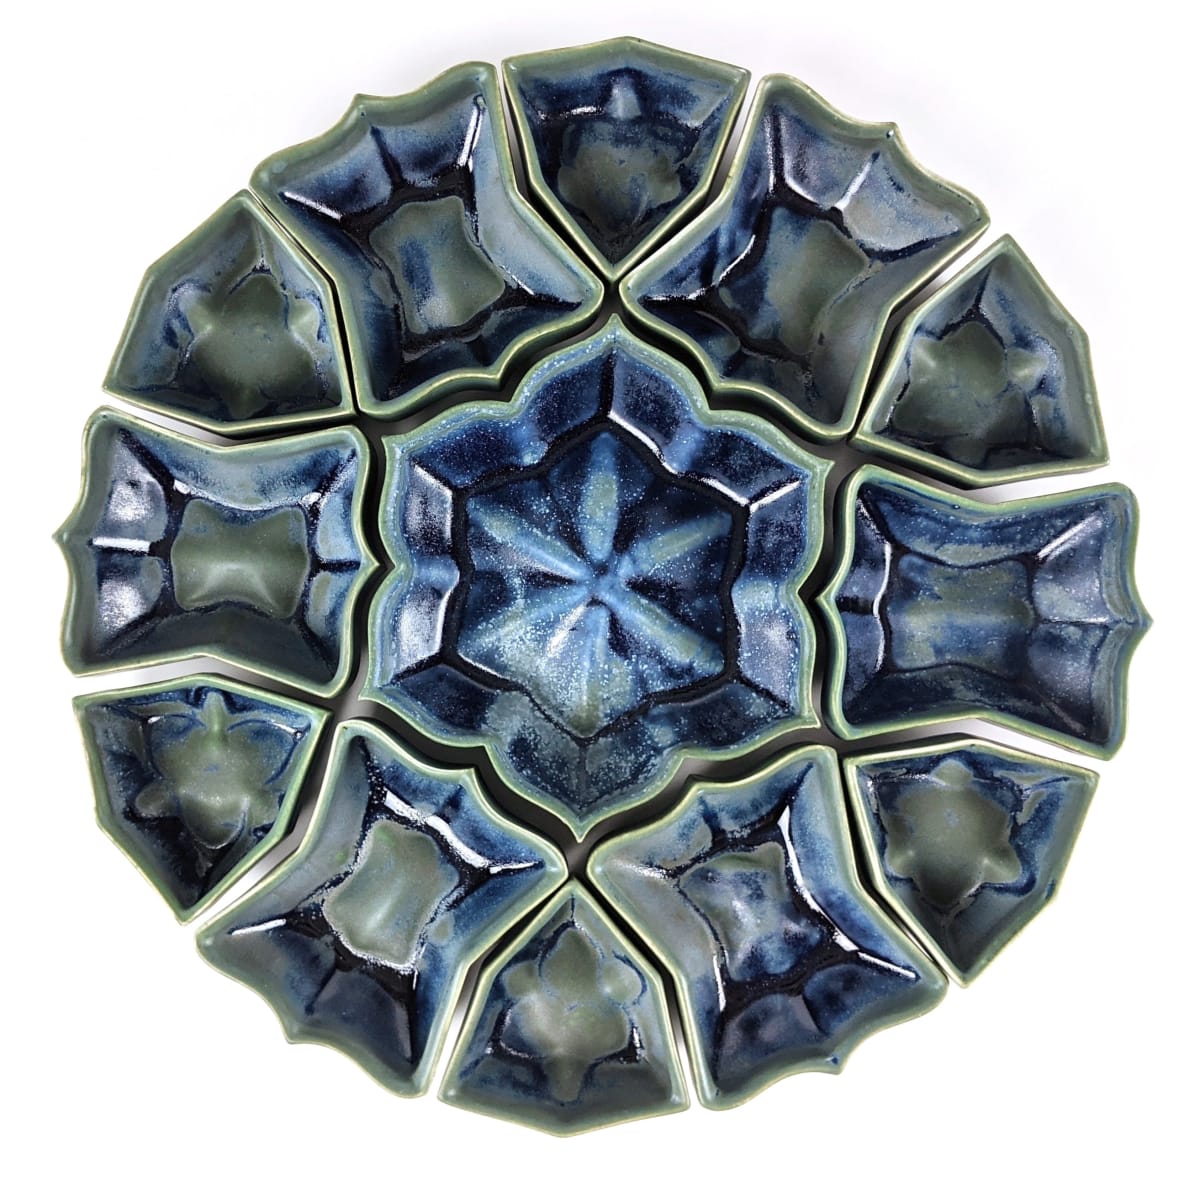 Hexa Collection  Image: Hexa Collection - Full Set of Porcelain Dishes